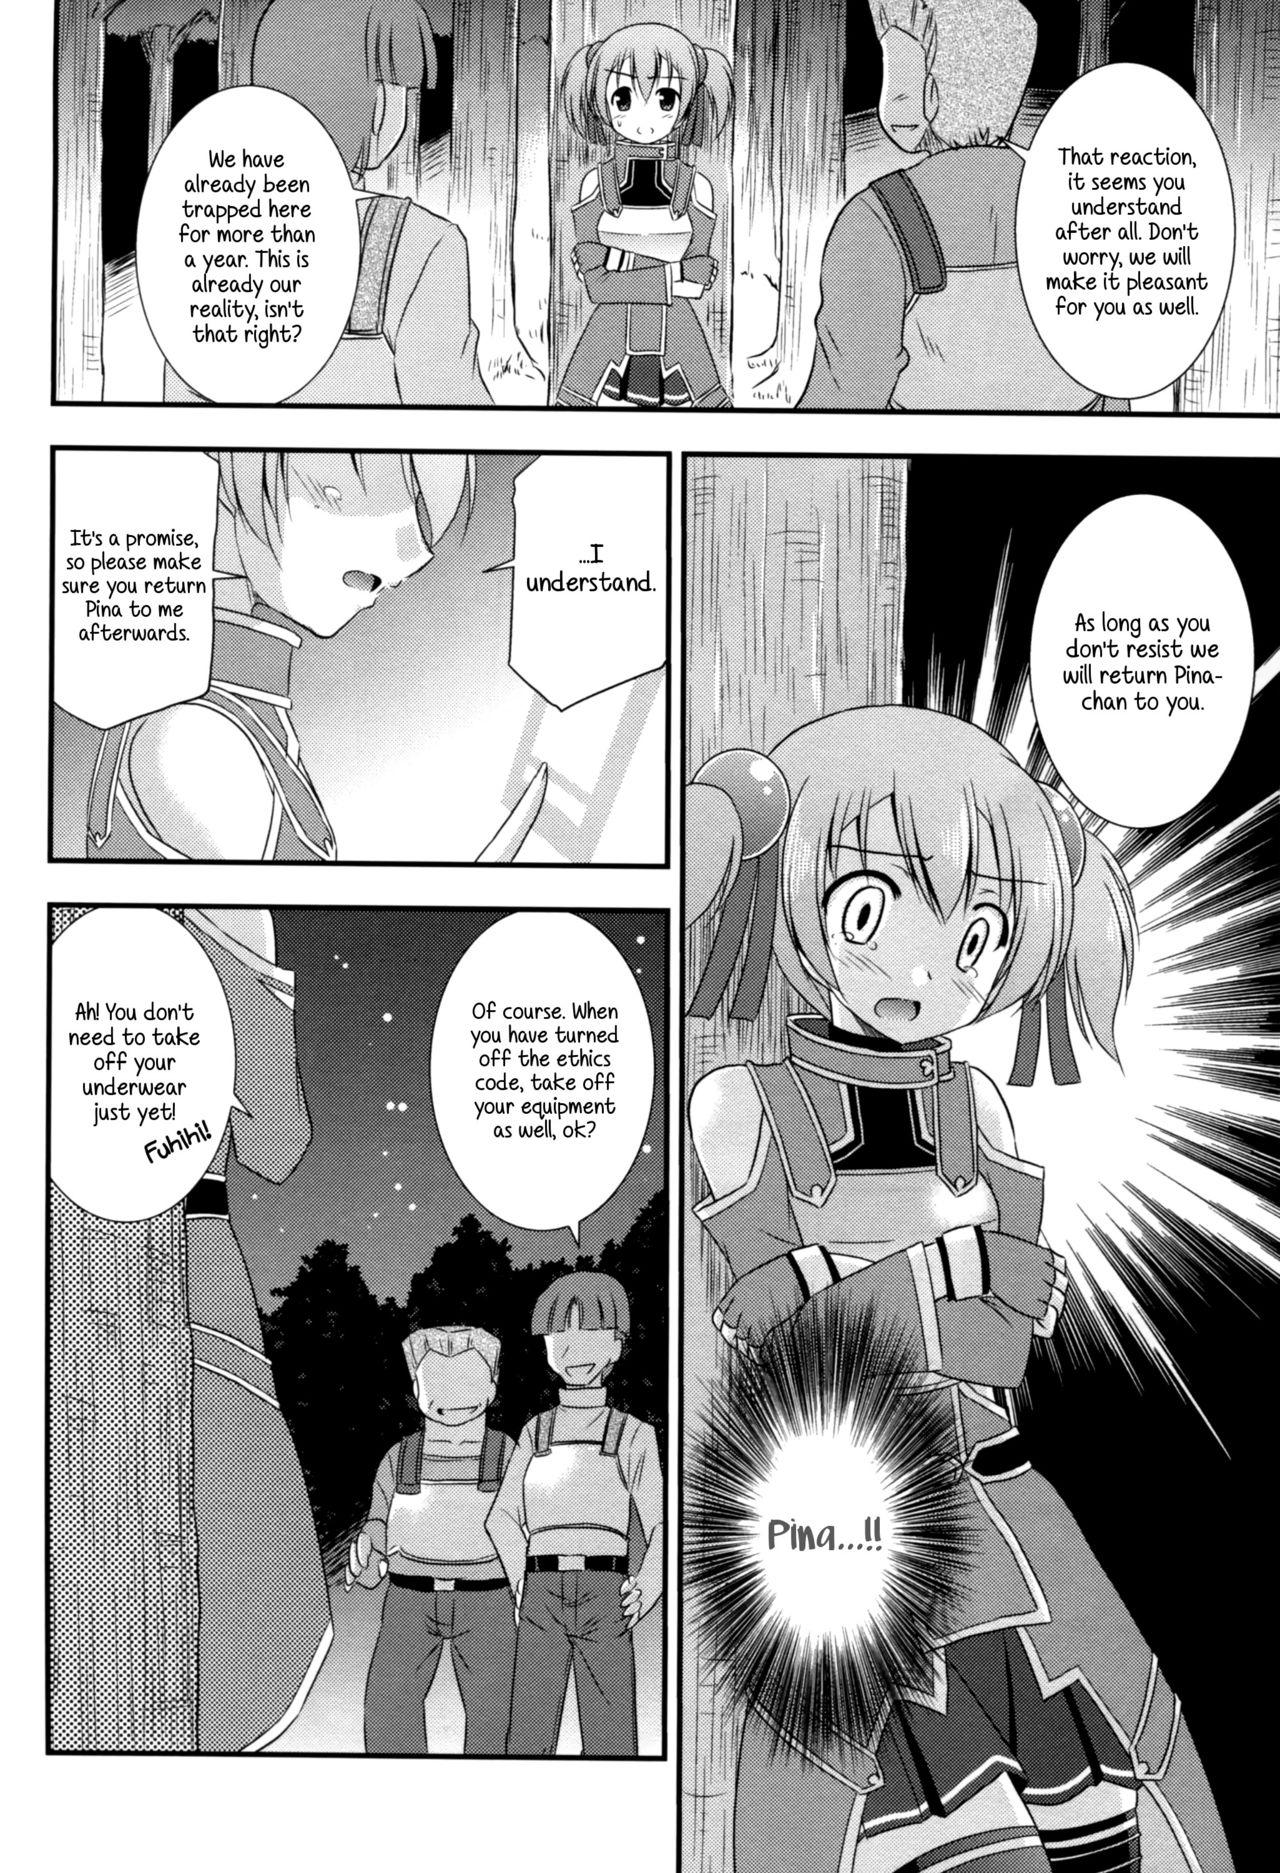 Transex Silica Route Online - Sword art online Audition - Page 7